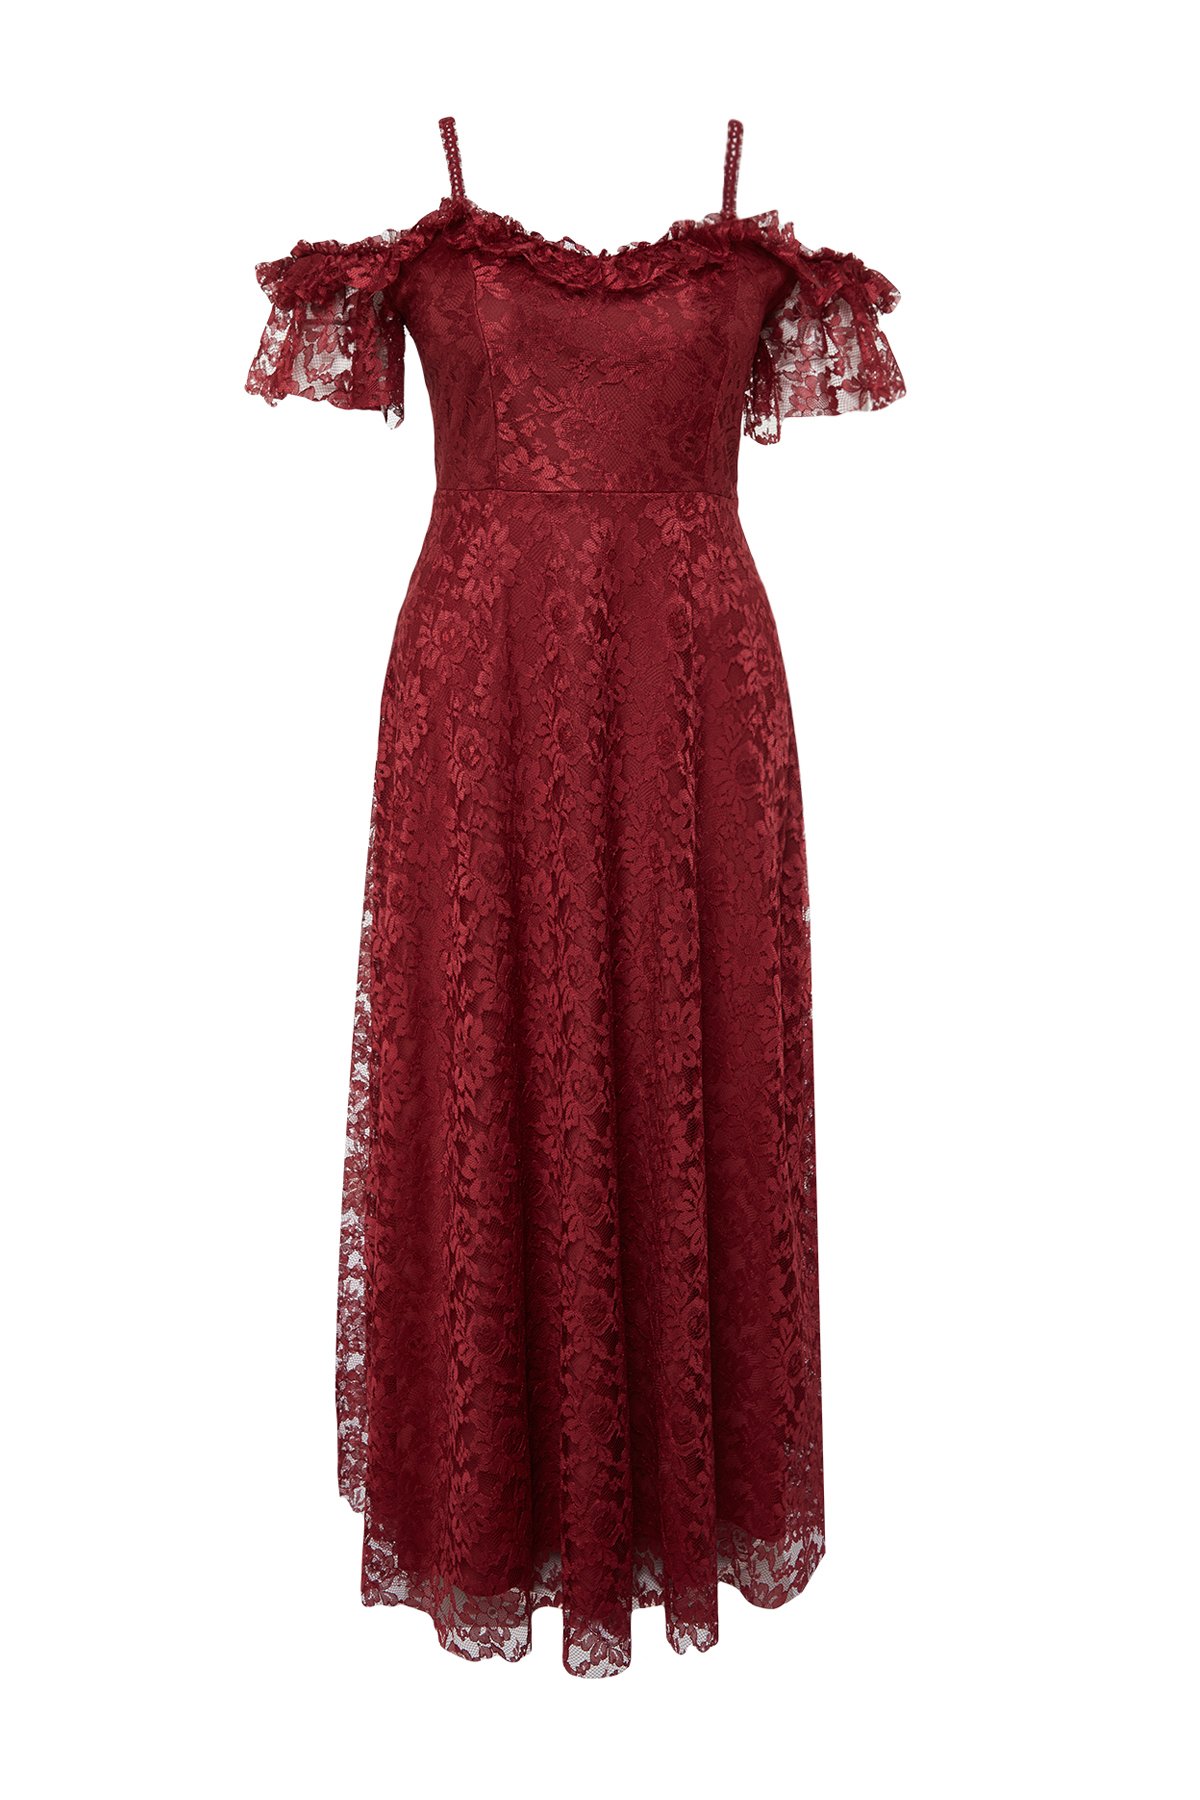 Trendyol Curve Burgundy Lace and Guipure Woven Evening Dress